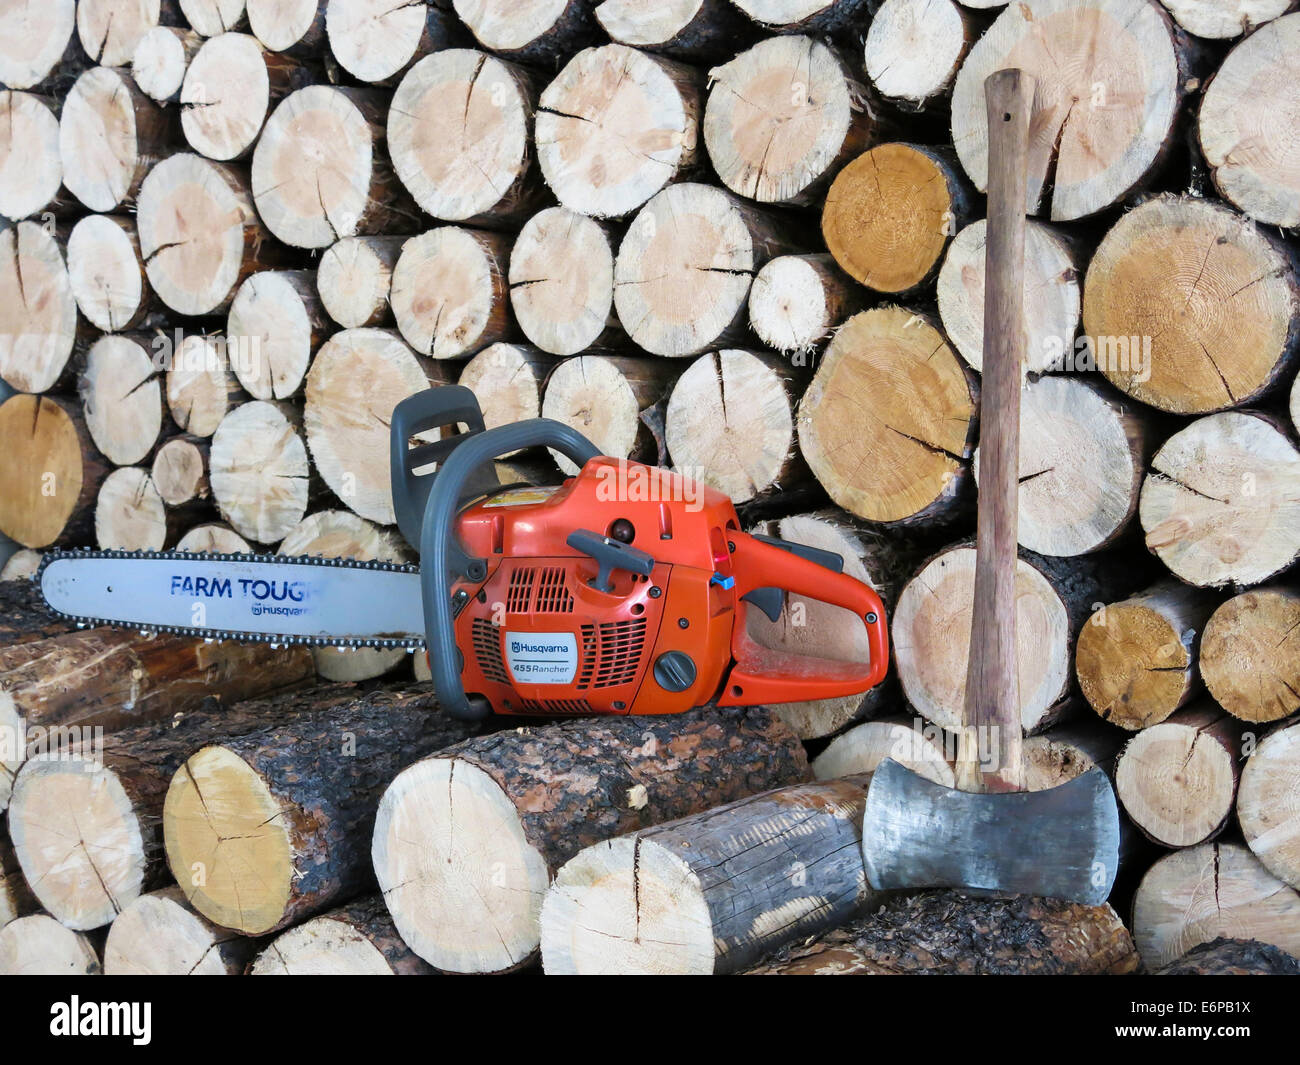 Chainsaw Against Firewood Pile, USA Stock Photo